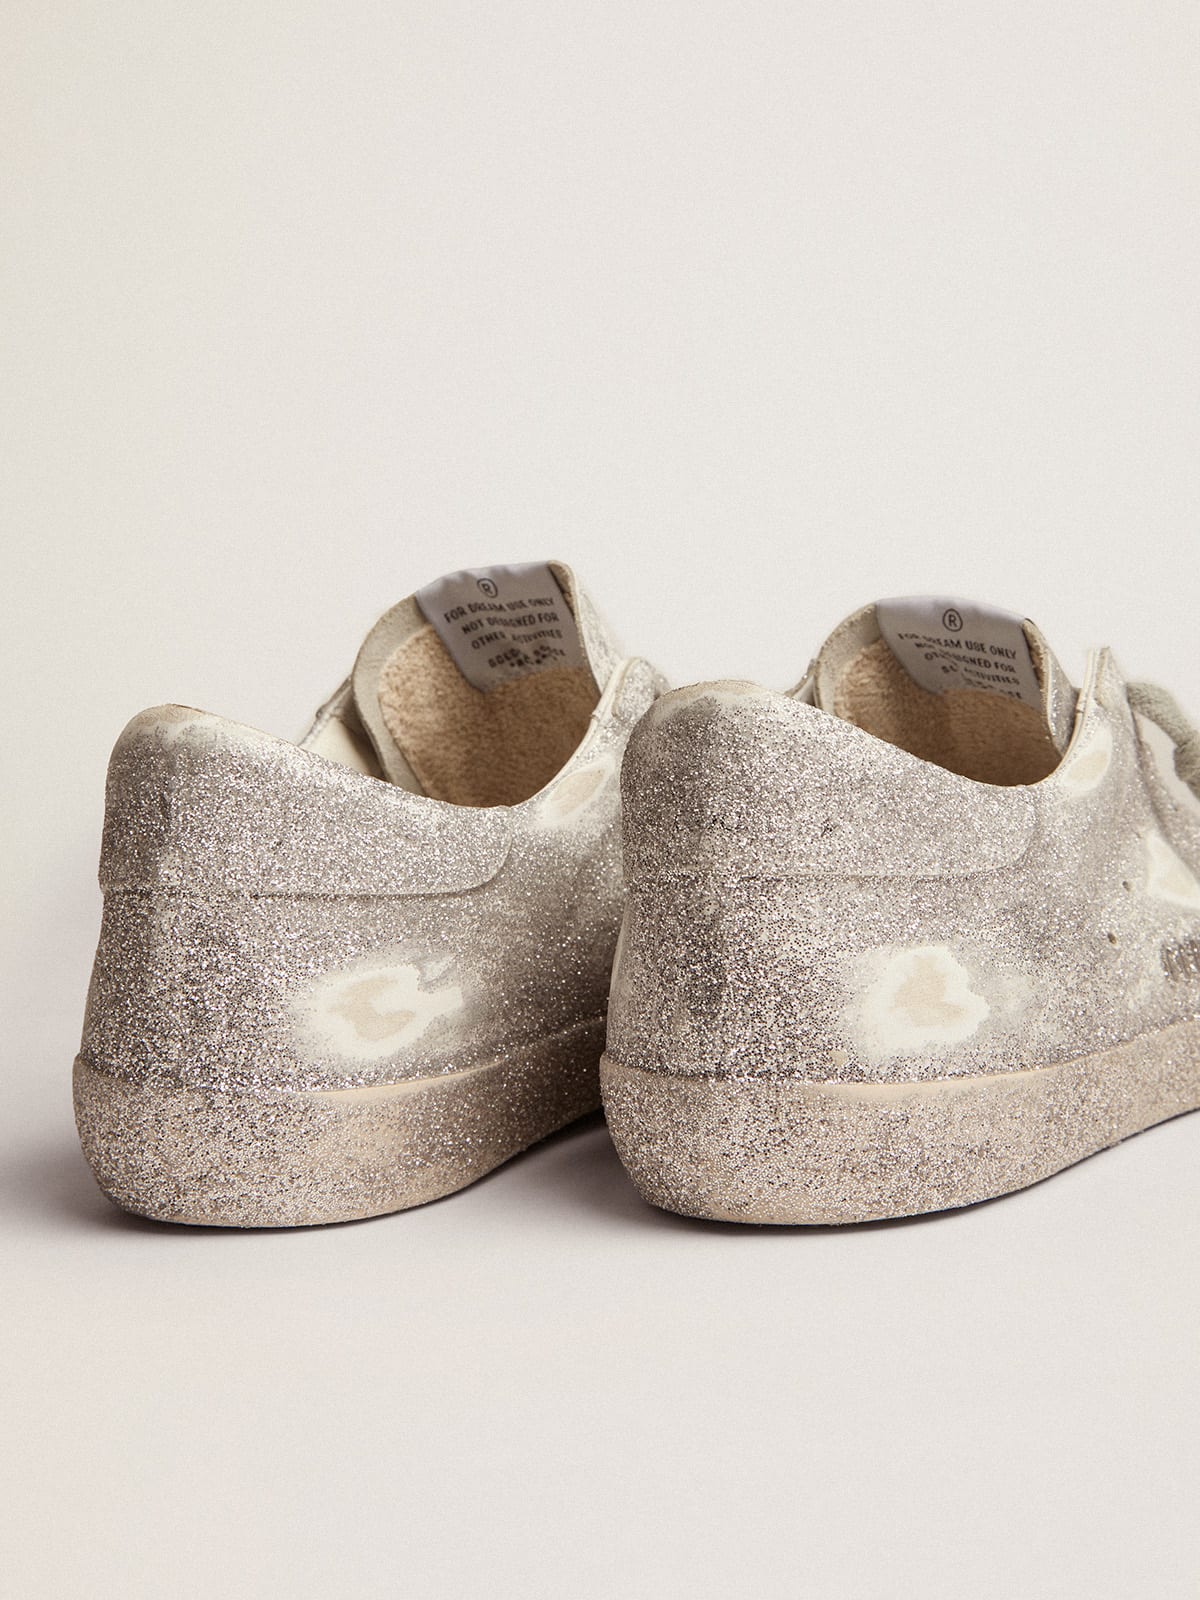 Golden Goose - Super-Star sneakers in silver leather with all-over glitter dust in 